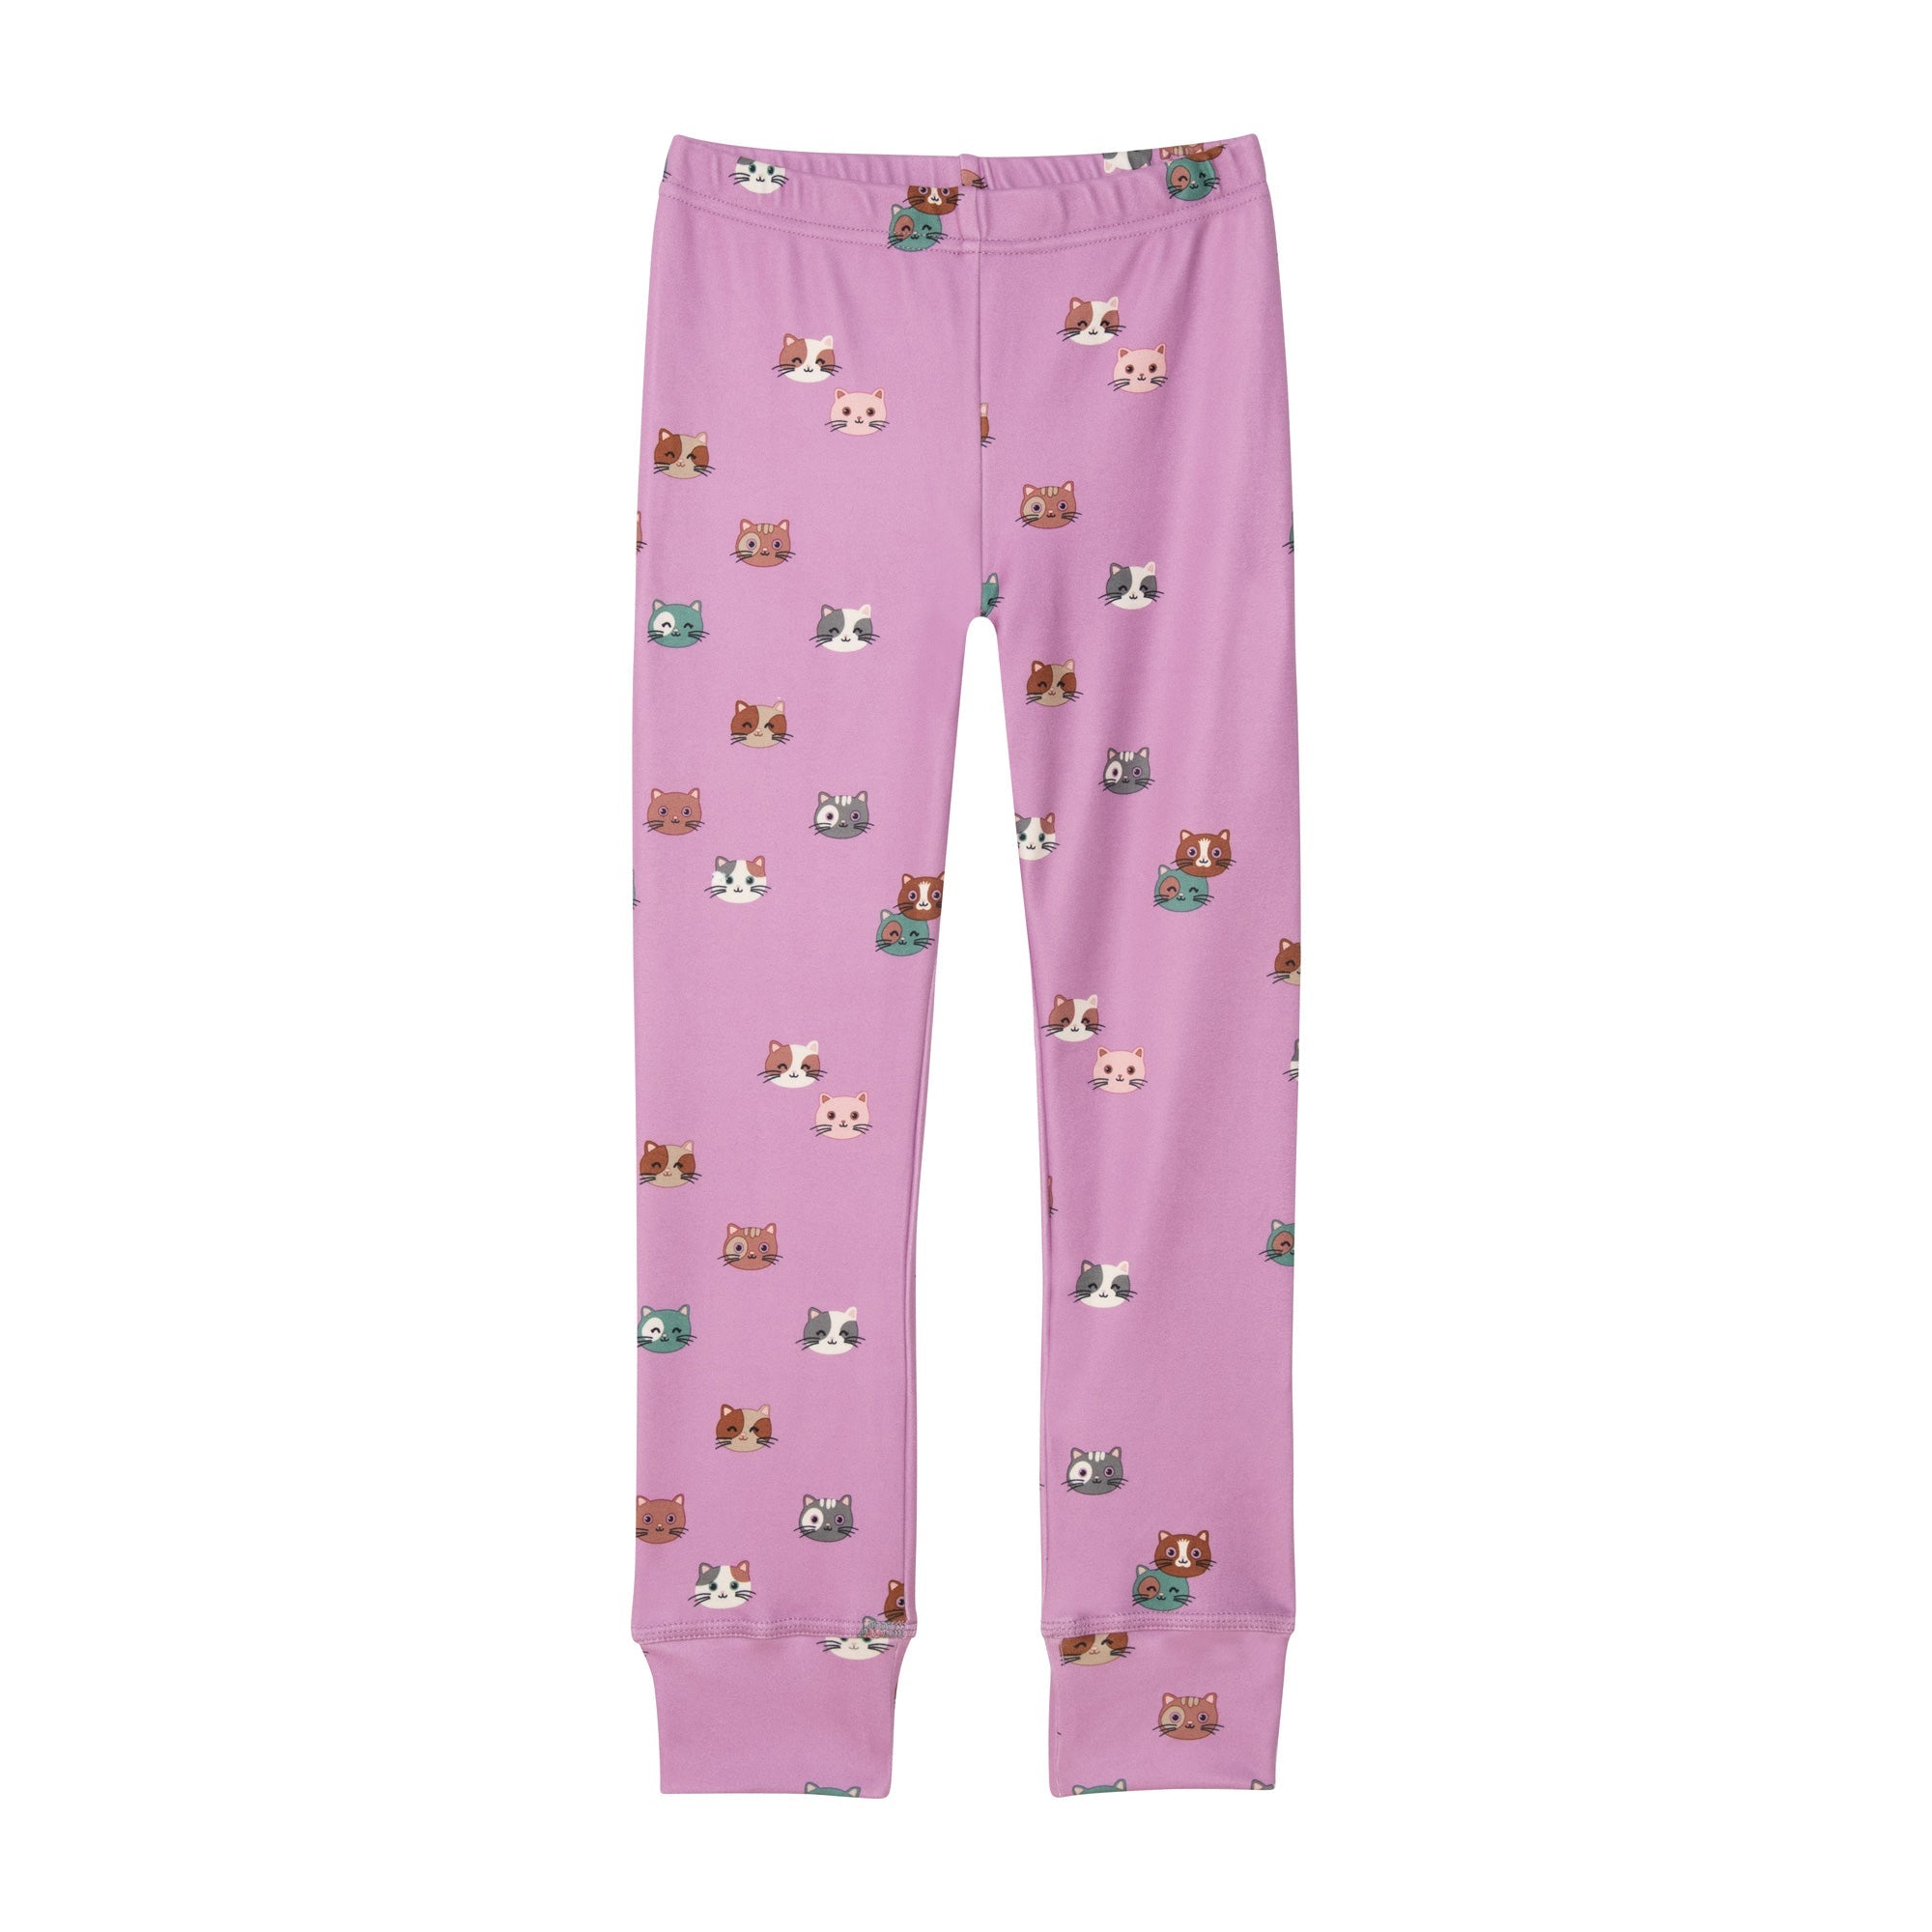 Two Piece Thermal Underwear Purple With Printed Little Cats